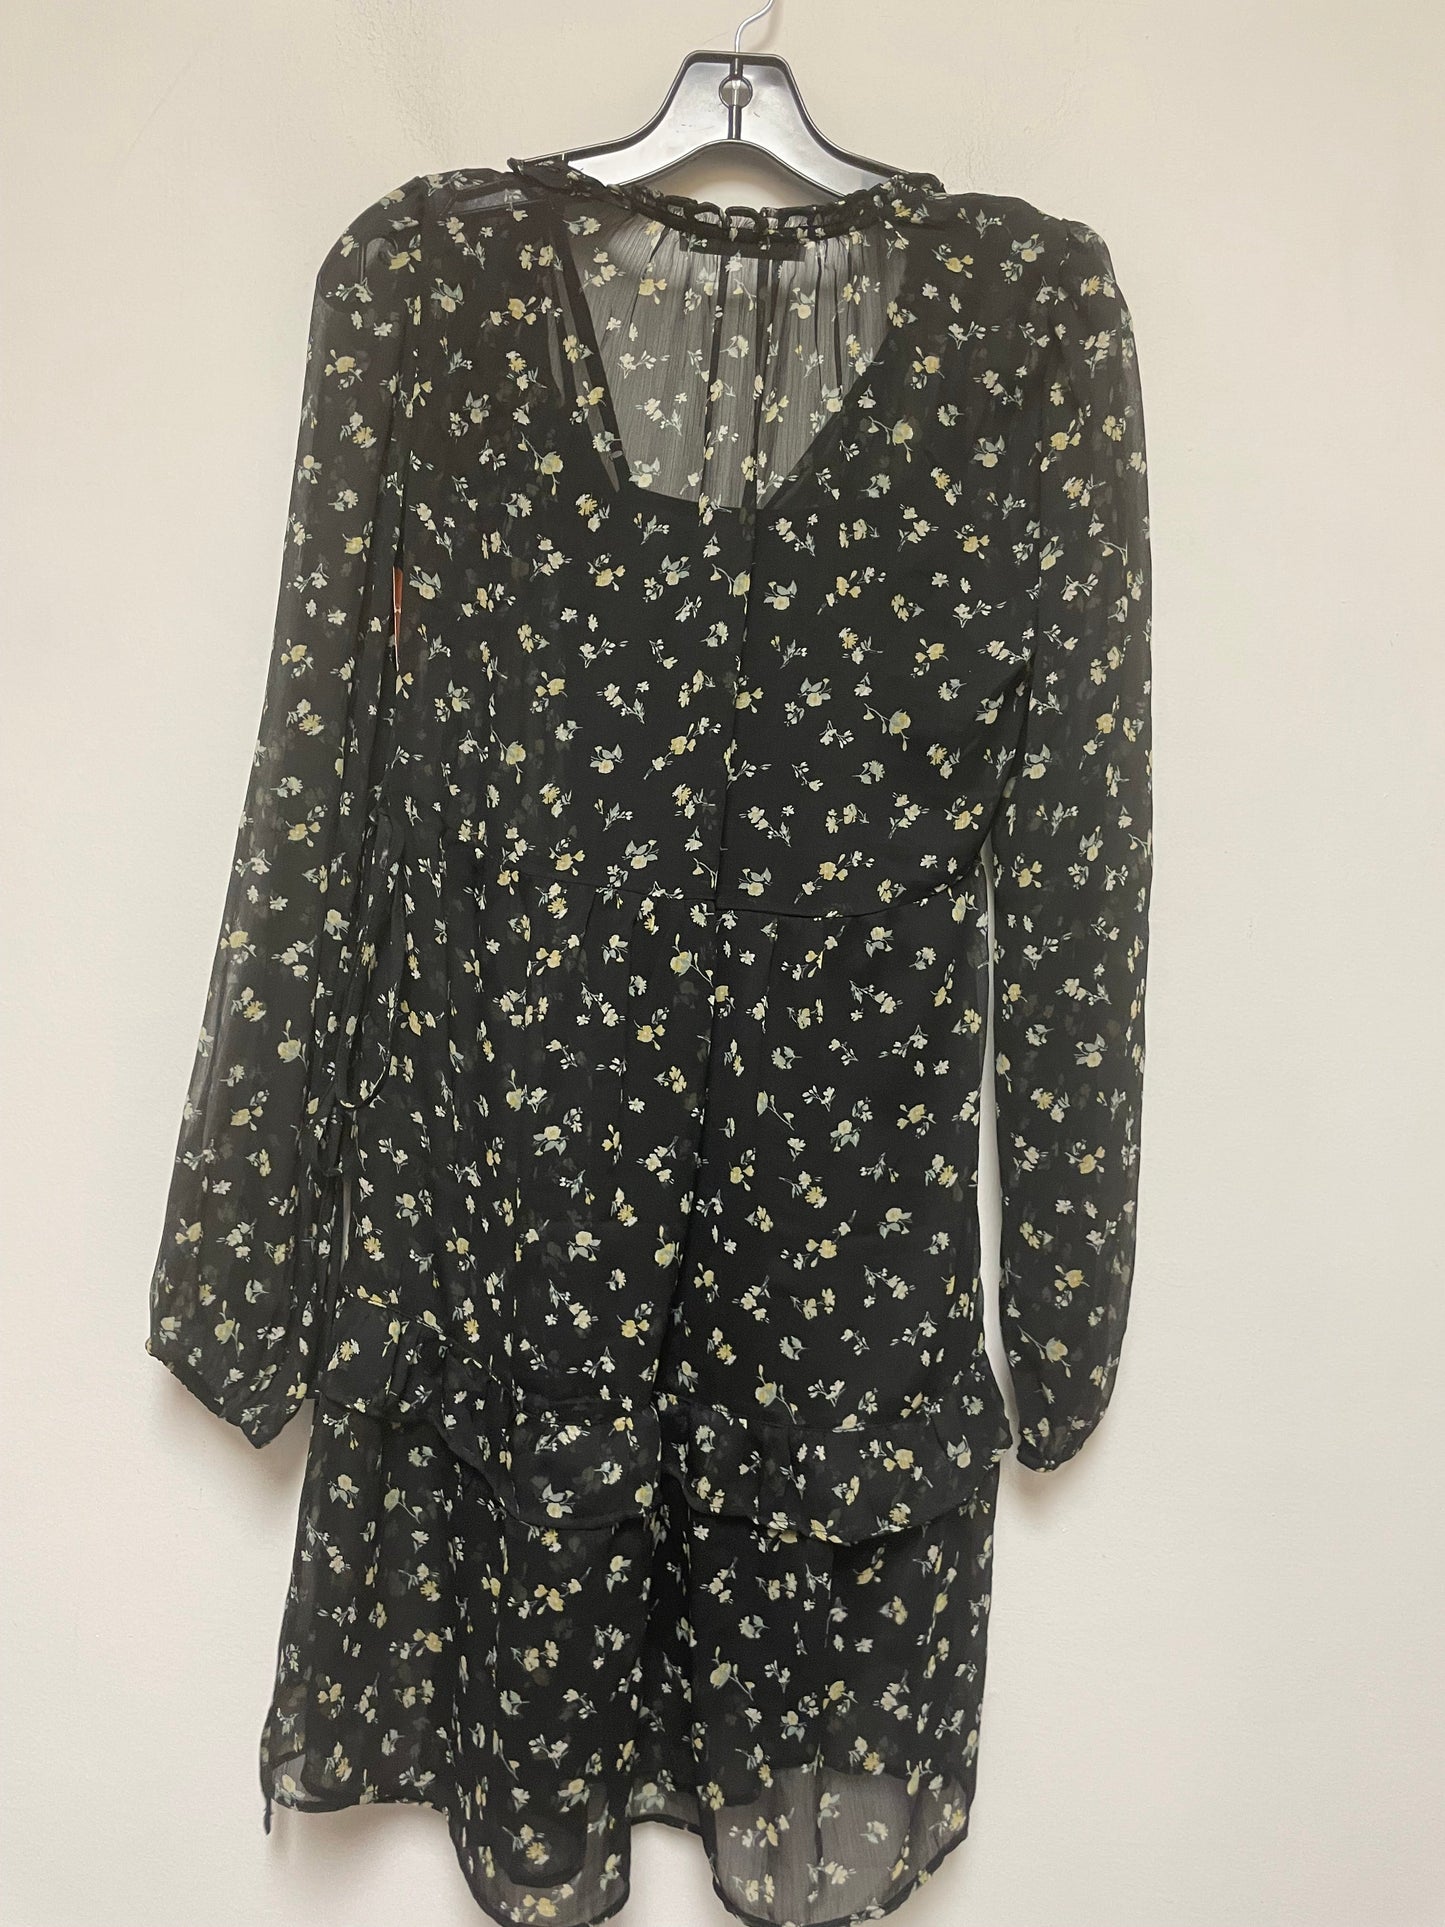 Dress Casual Short By Abercrombie And Fitch  Size: Xs